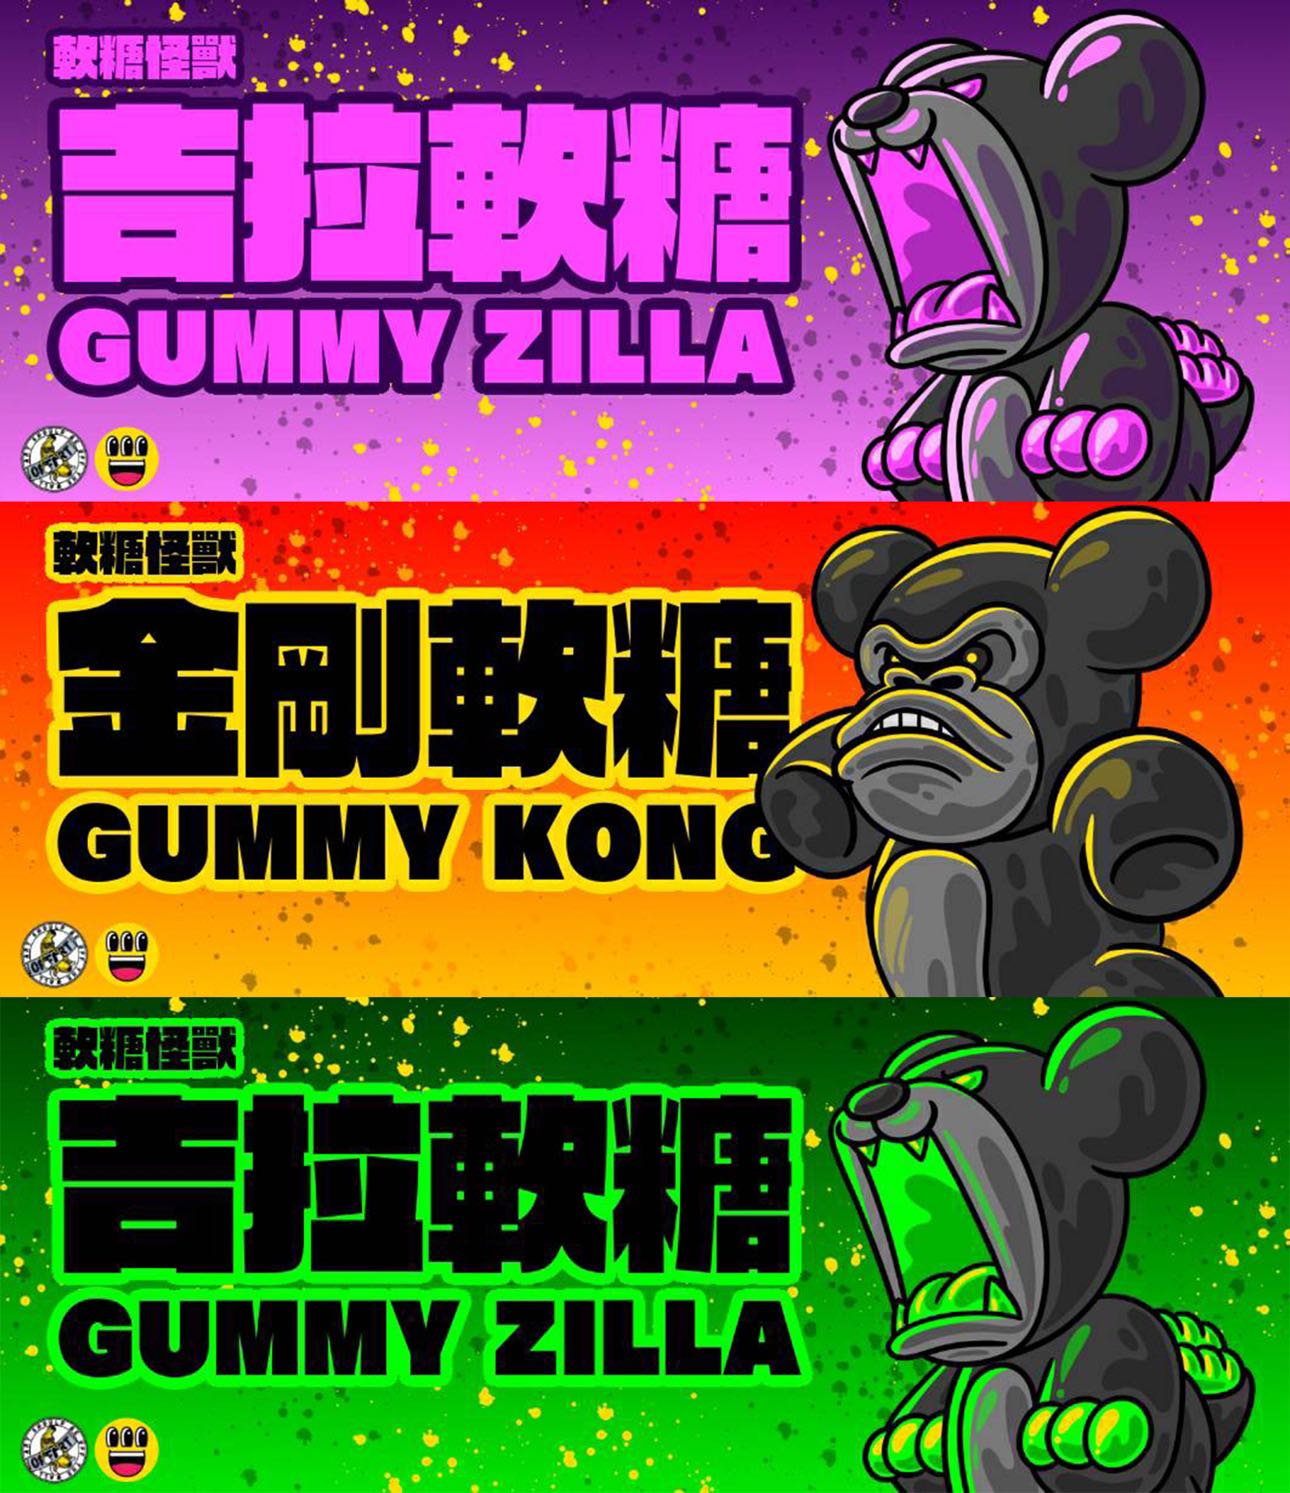 Cartoon characters, logo with banana, gorilla, bear, and more in Just Kidding Gummy Monster Zilla Vs Gummy Kong by Bruce.